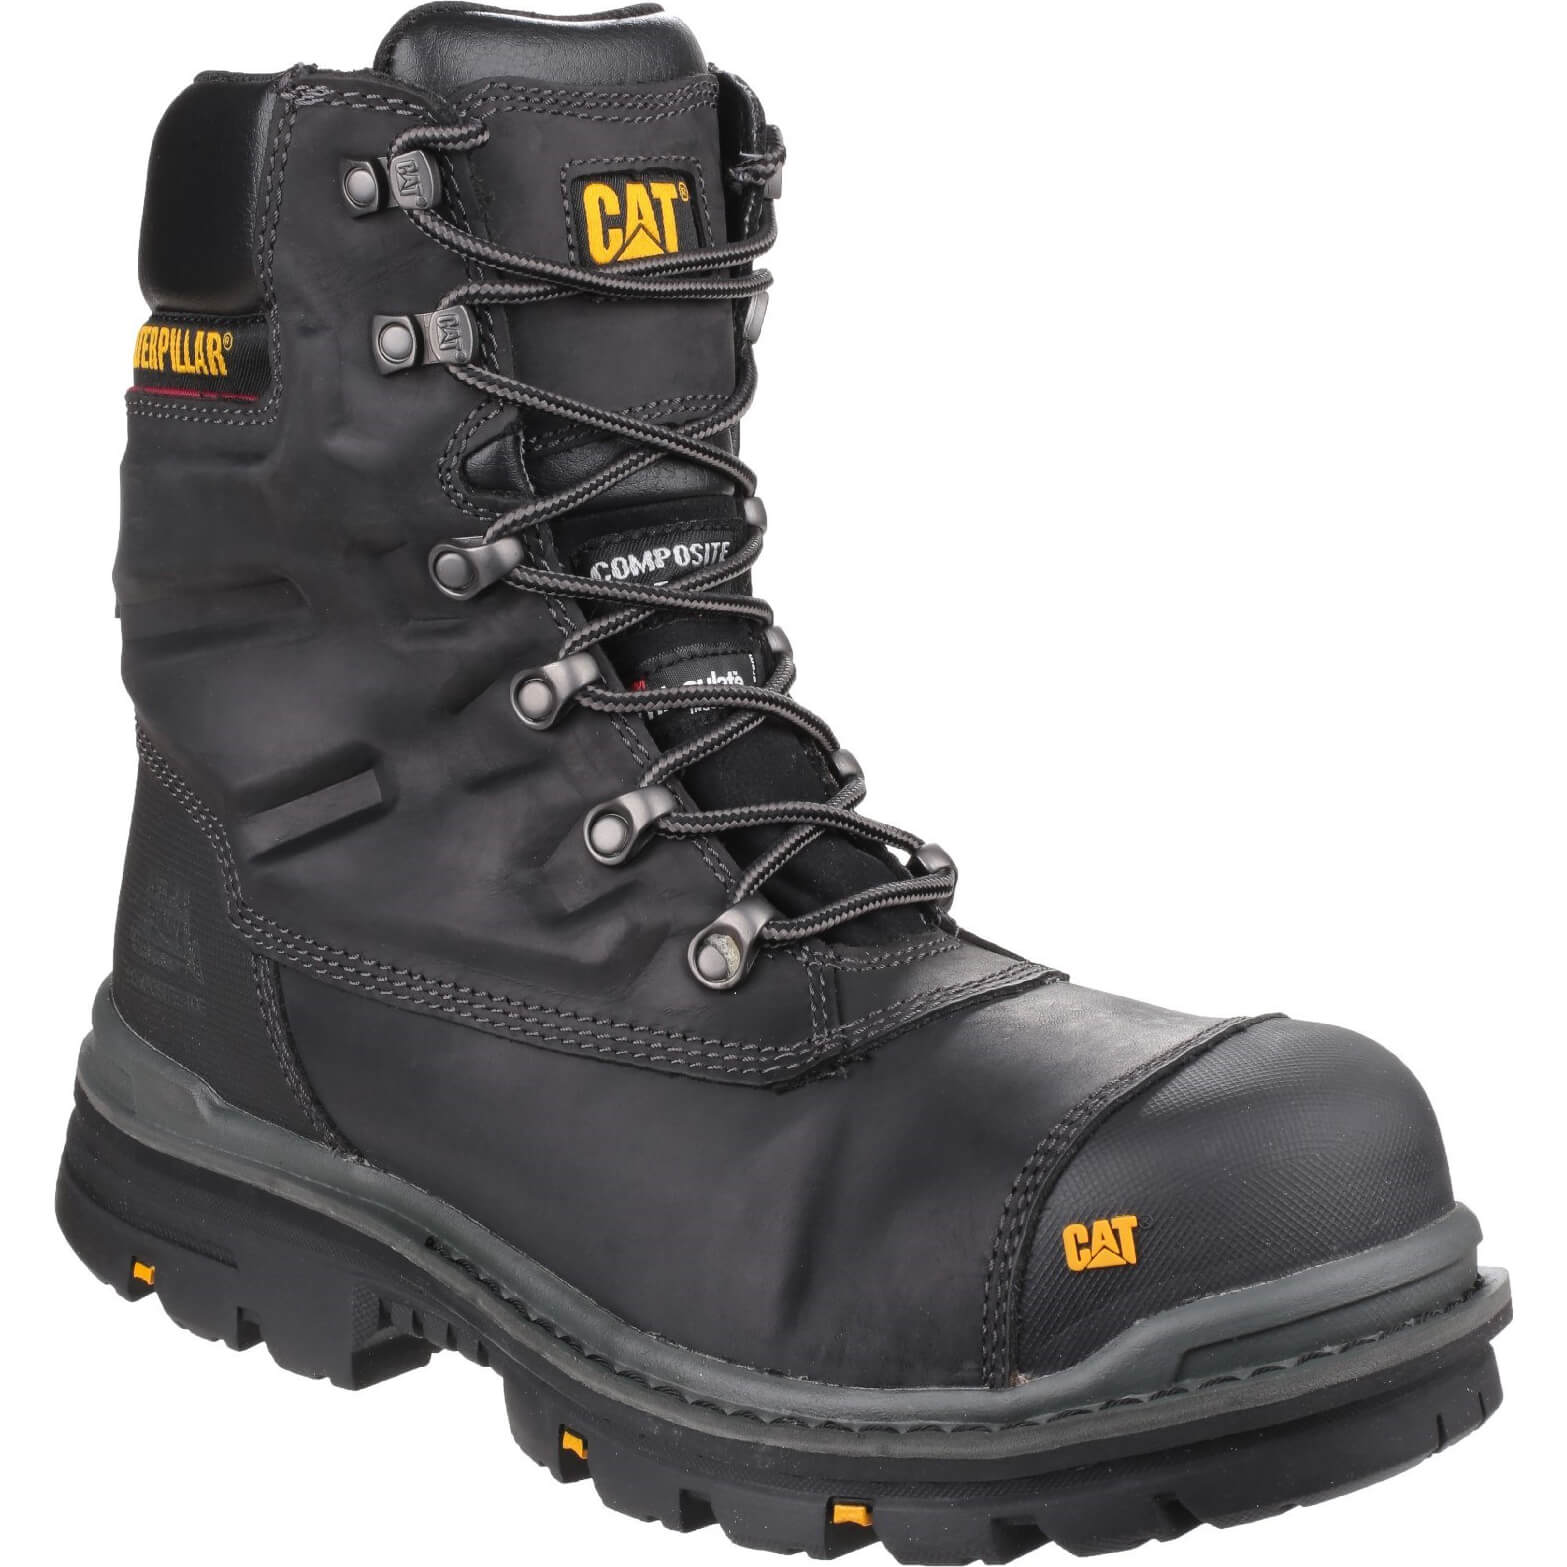 Image of Caterpillar Mens Premier Waterproof Safety Boots Black Size 10